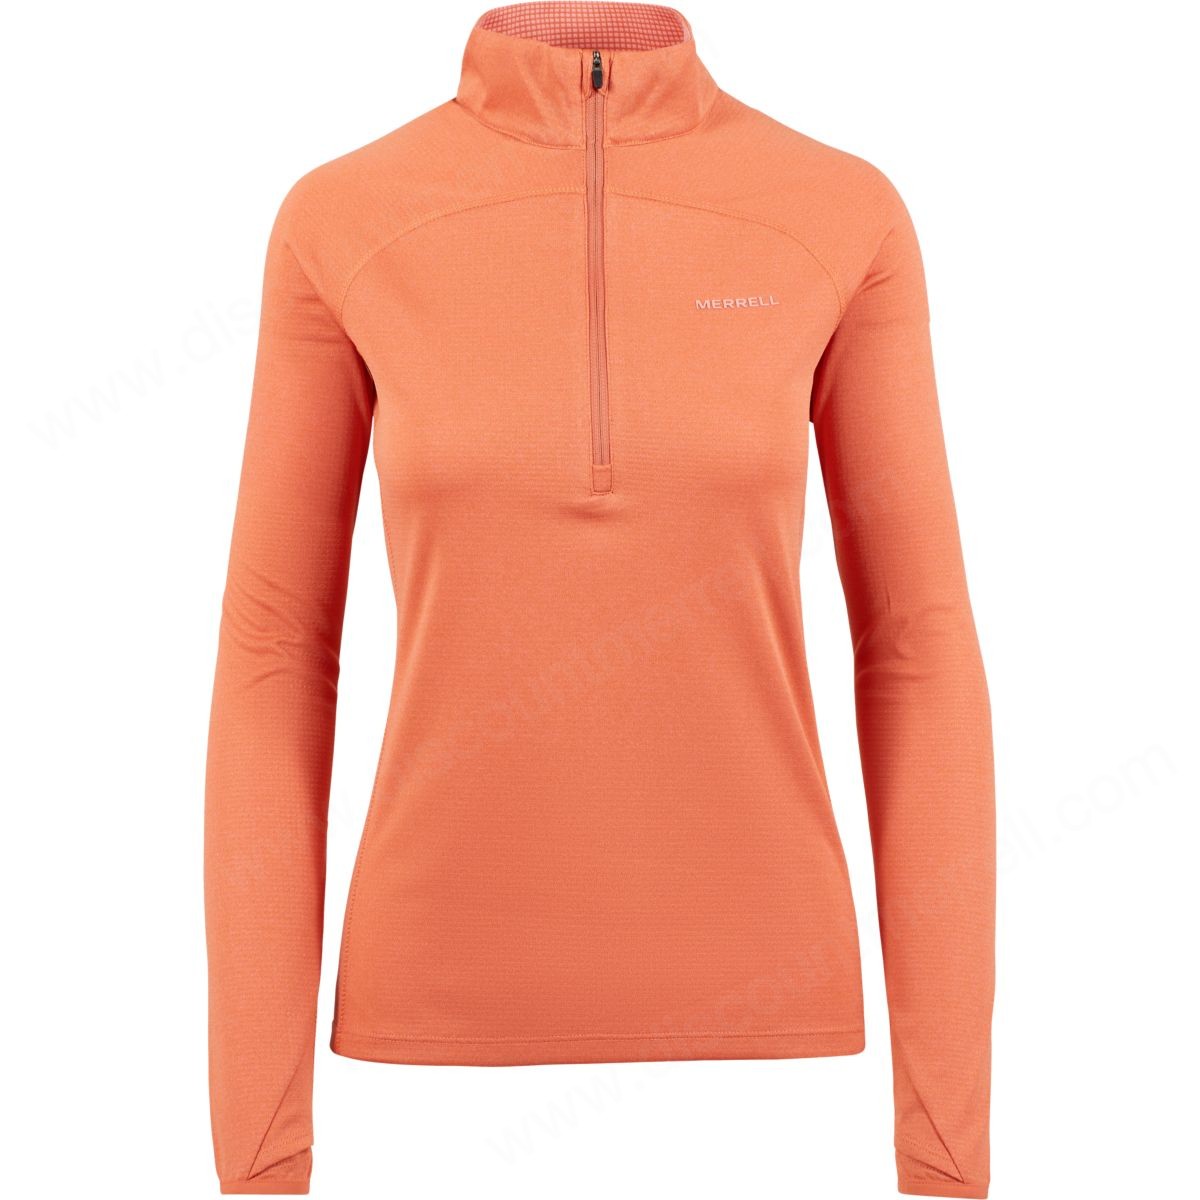 Merrell Lady's Lightweight Long Sleeve / Zip Mid-Layer With Drirelease® Fabric Apricot Brandy Heather - Merrell Lady's Lightweight Long Sleeve / Zip Mid-Layer With Drirelease® Fabric Apricot Brandy Heather